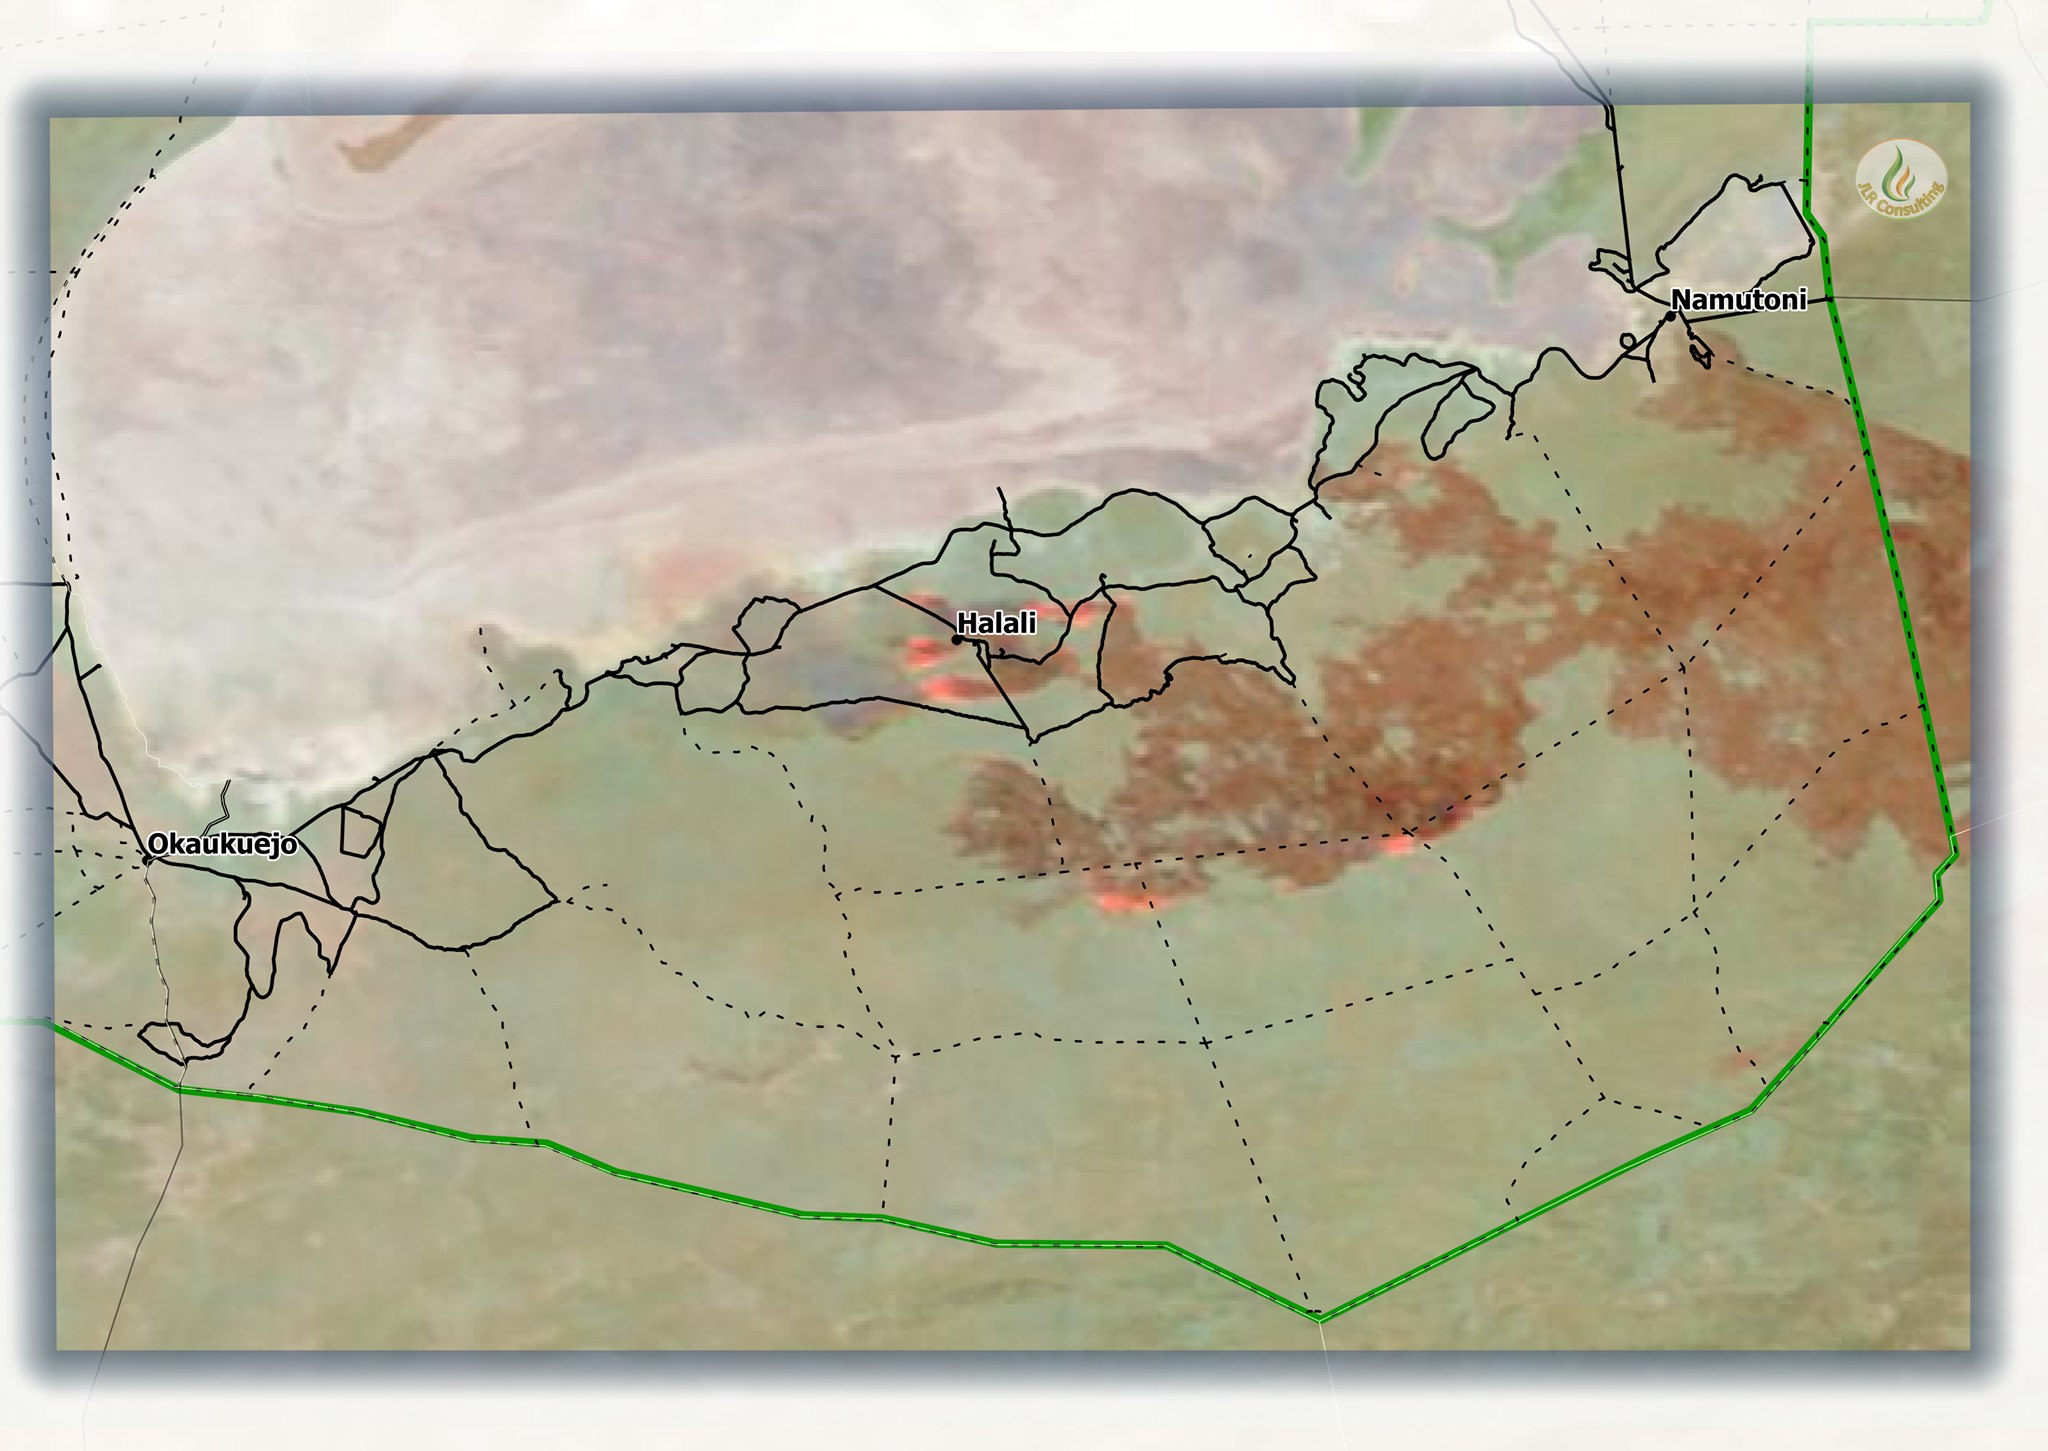 Colour composite image showing the direction and extent of the fire in the Halali area of Etosha National Park on 17 October